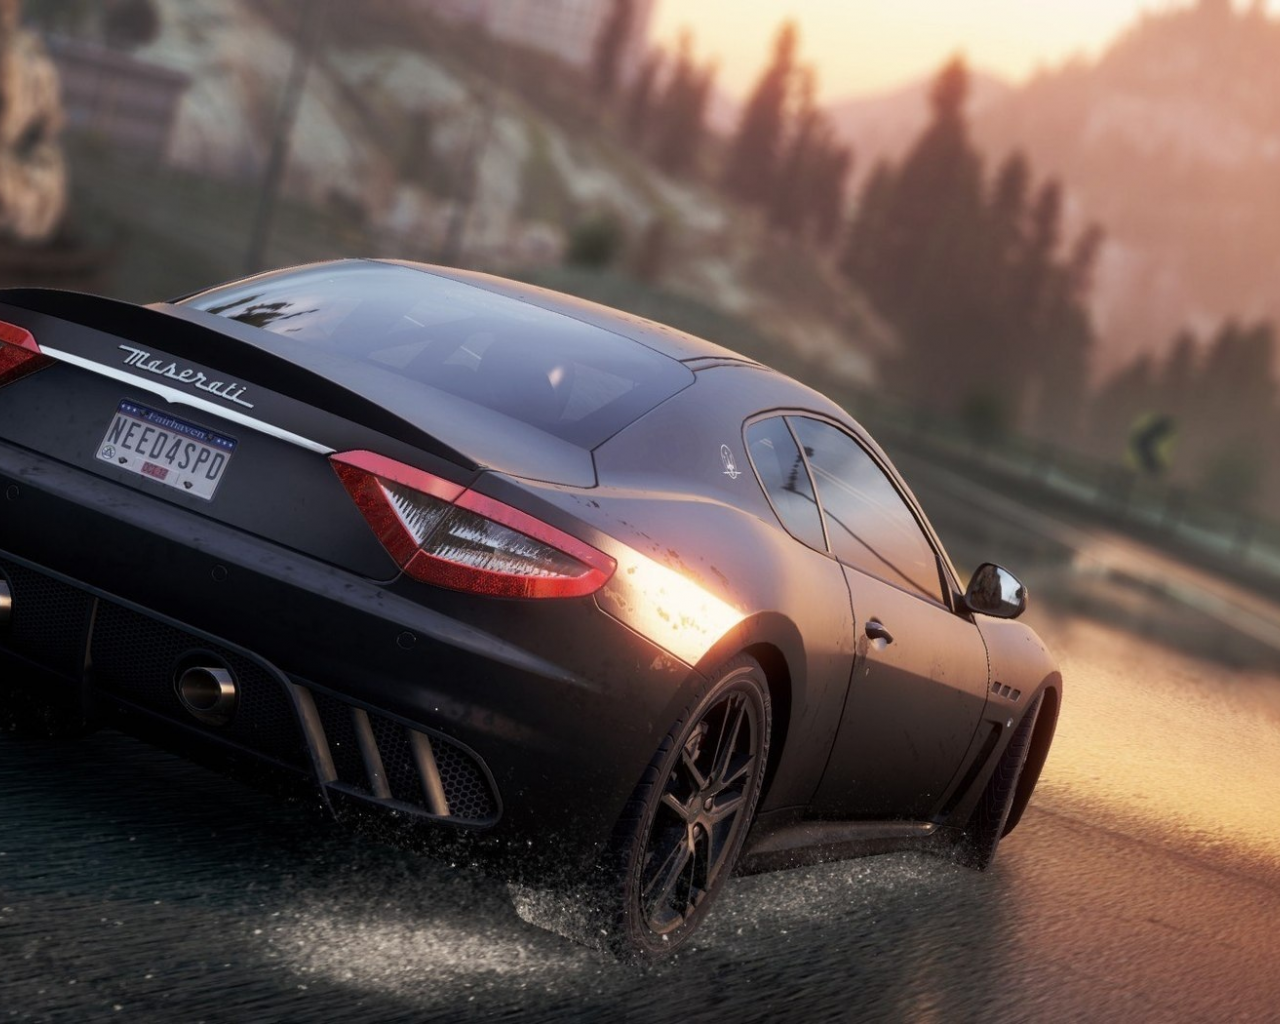 maserati granturismoгонка, need for speed most wanted 2